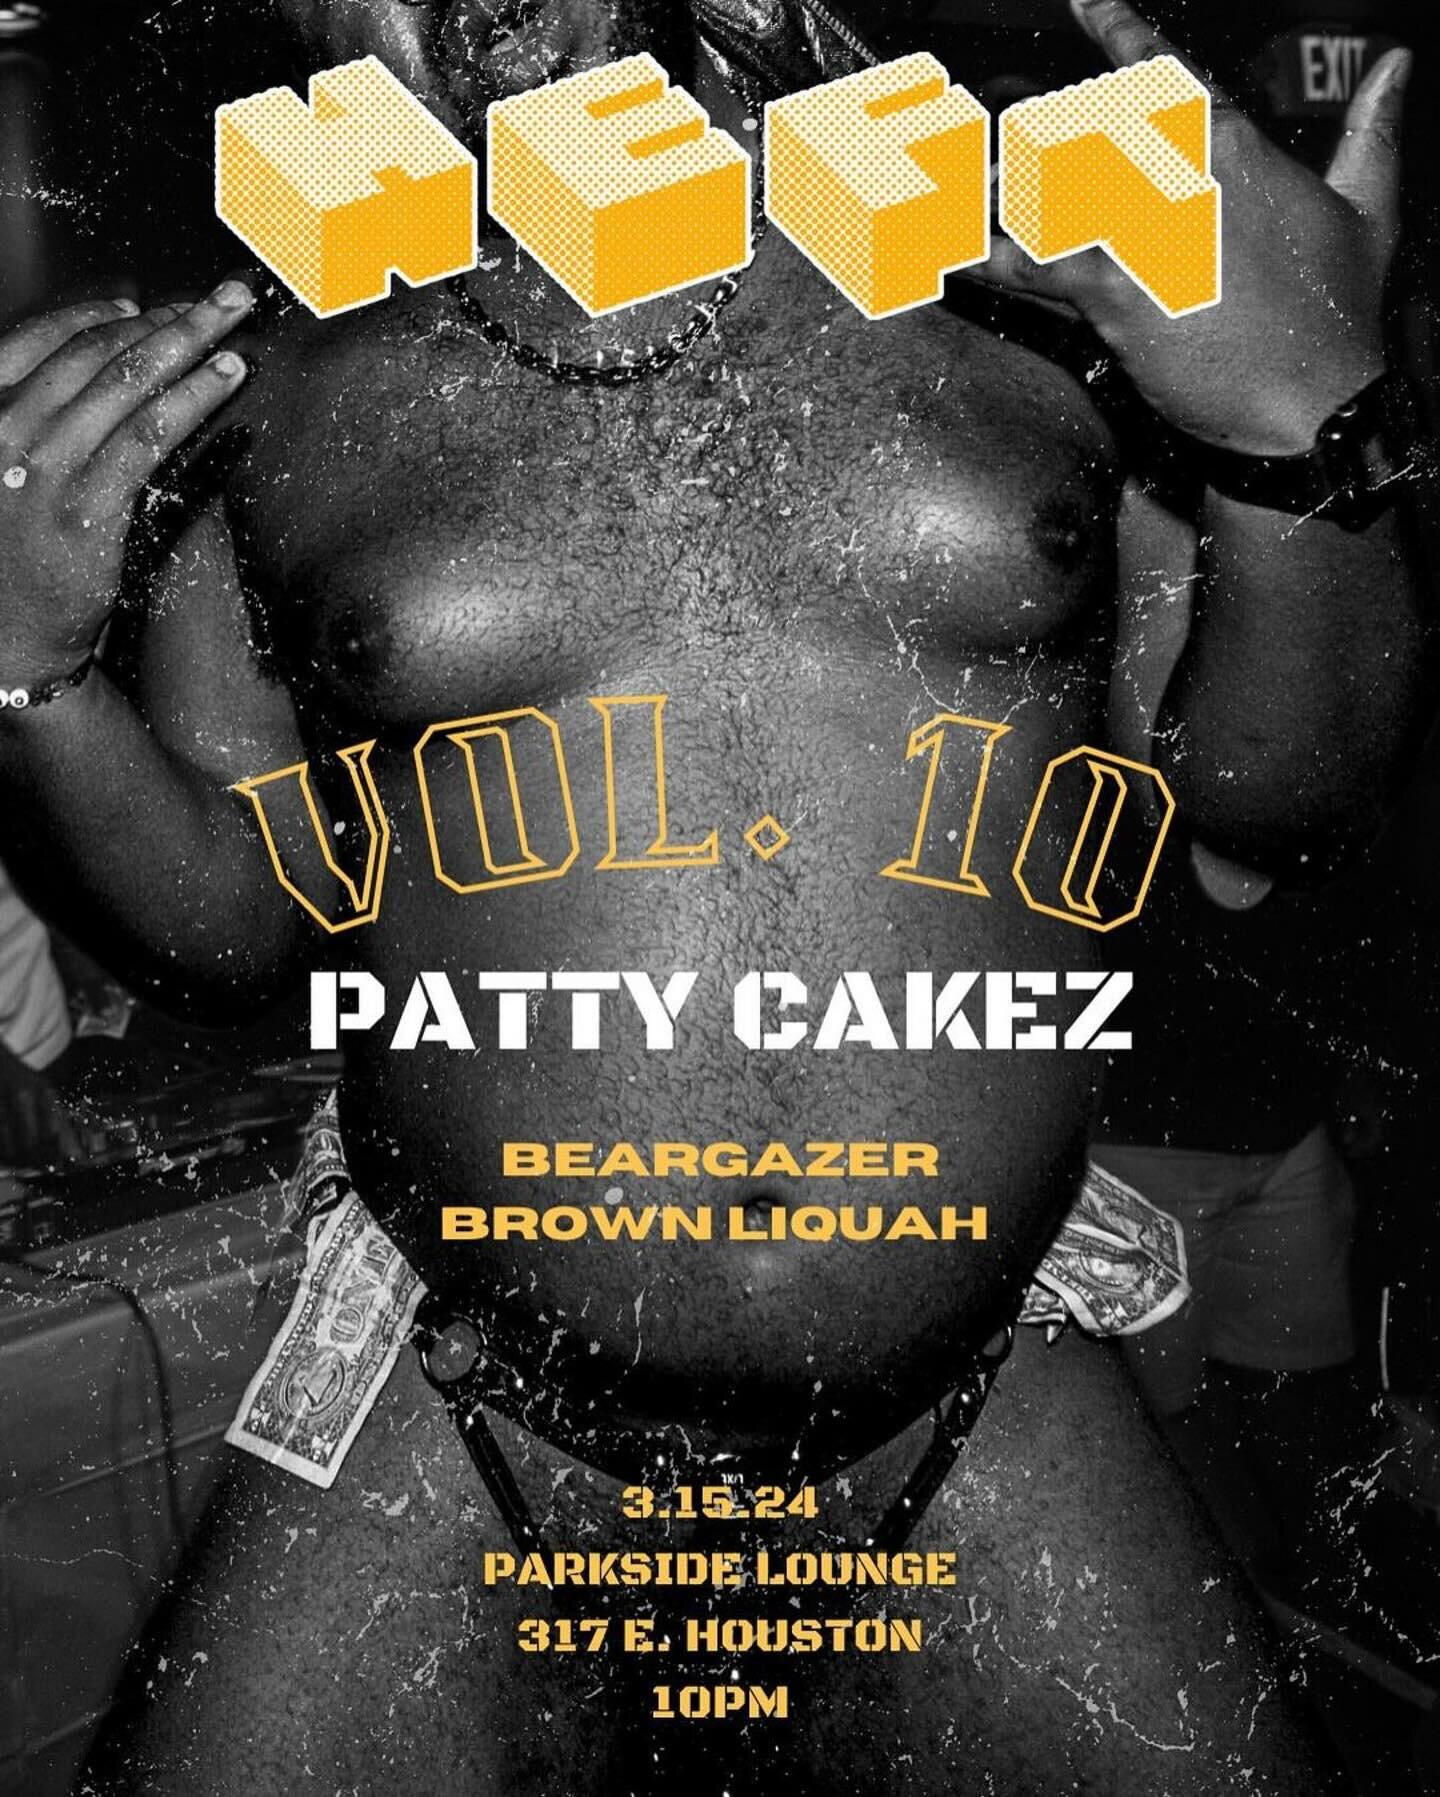 PATTY CAKEZ, PHATTY CAKEZ,  BEND OVAH MAKE IT SHAKE&hellip;.

We up in this B^%$!

HEFT Vol. 10: PATTY CAKEZ
MARCH 15th at @parksidelounge starting at 10 PM 🚨

So when we holla SKEE YEE that means PULL UP 🙌🏾 

Show us dat March Madness!

BIG sound